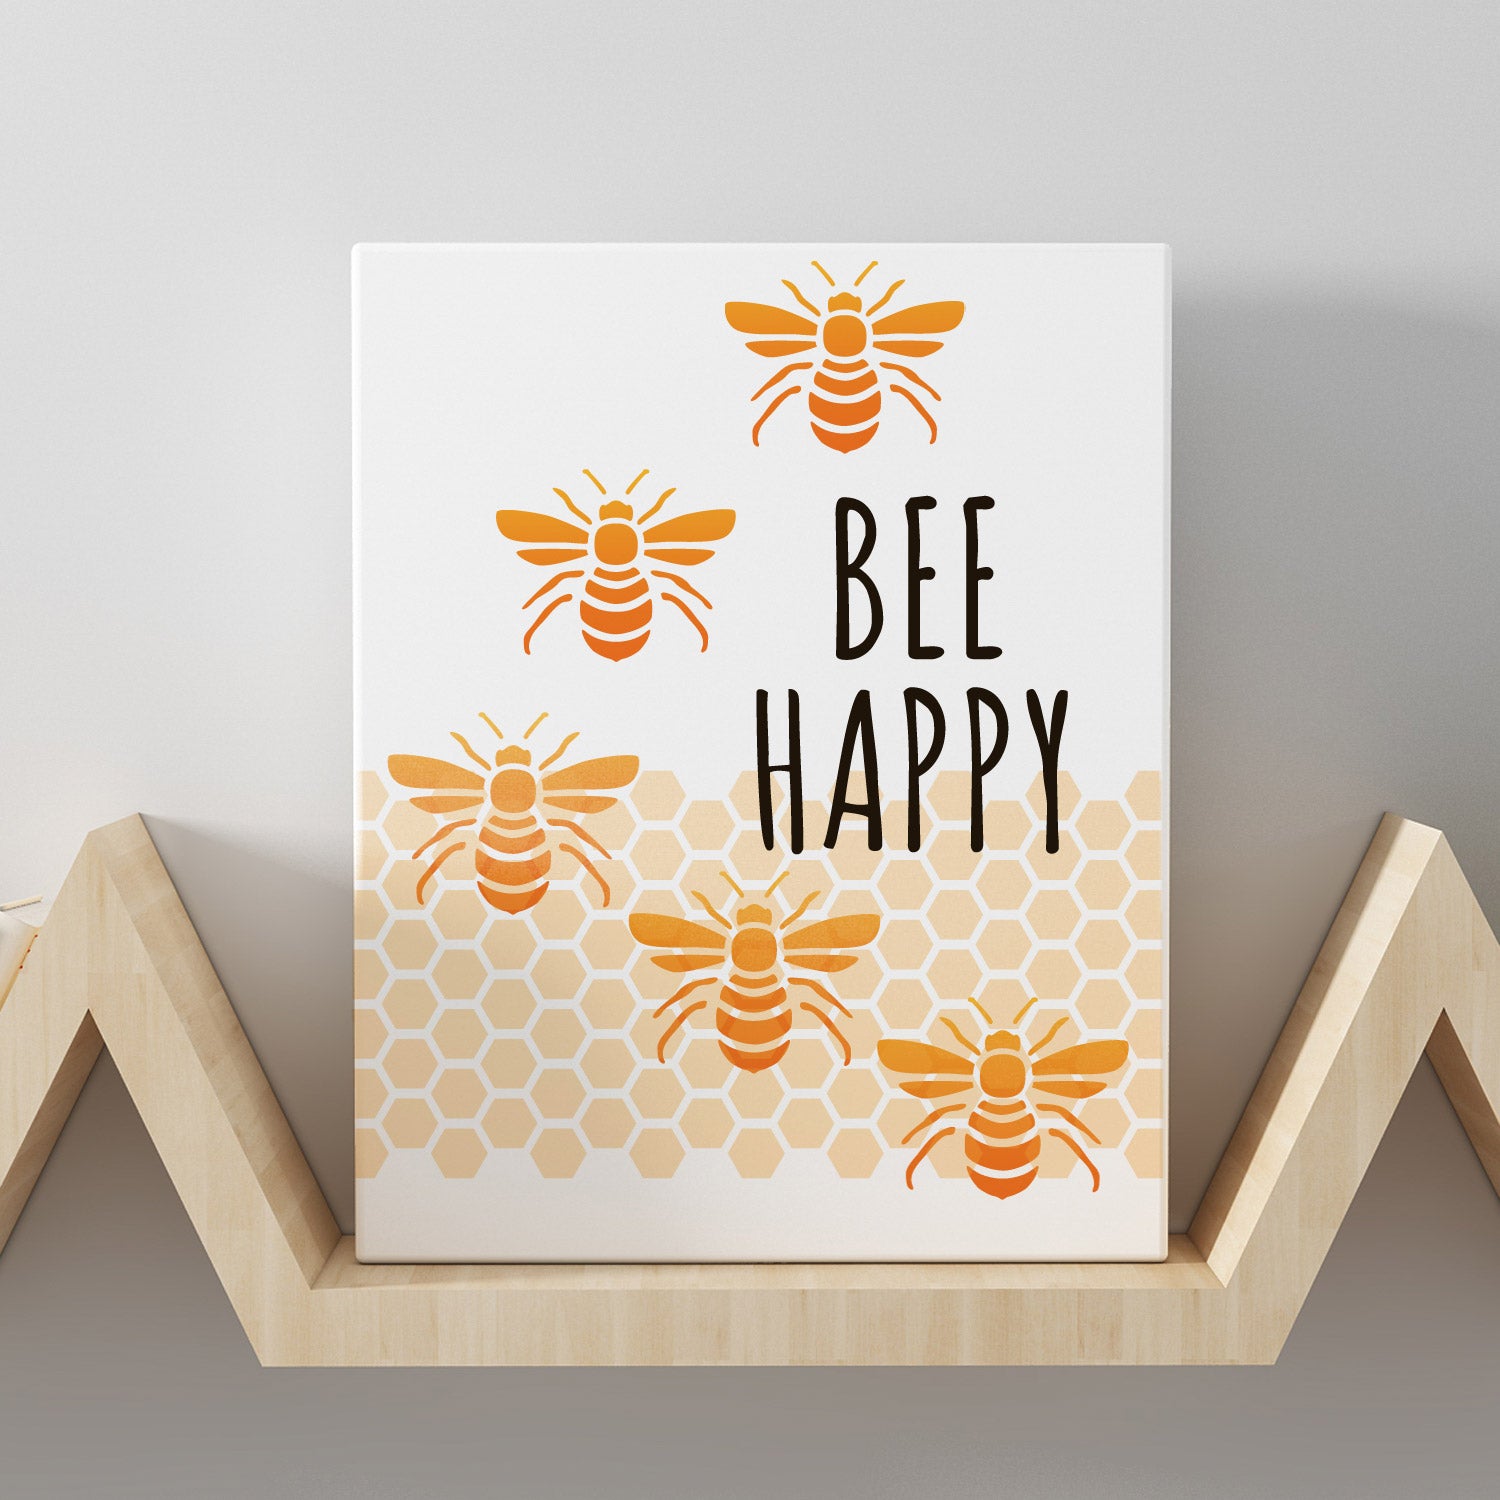 CraftStar Bee and Honeycomb Stencil Set on Canvas Print